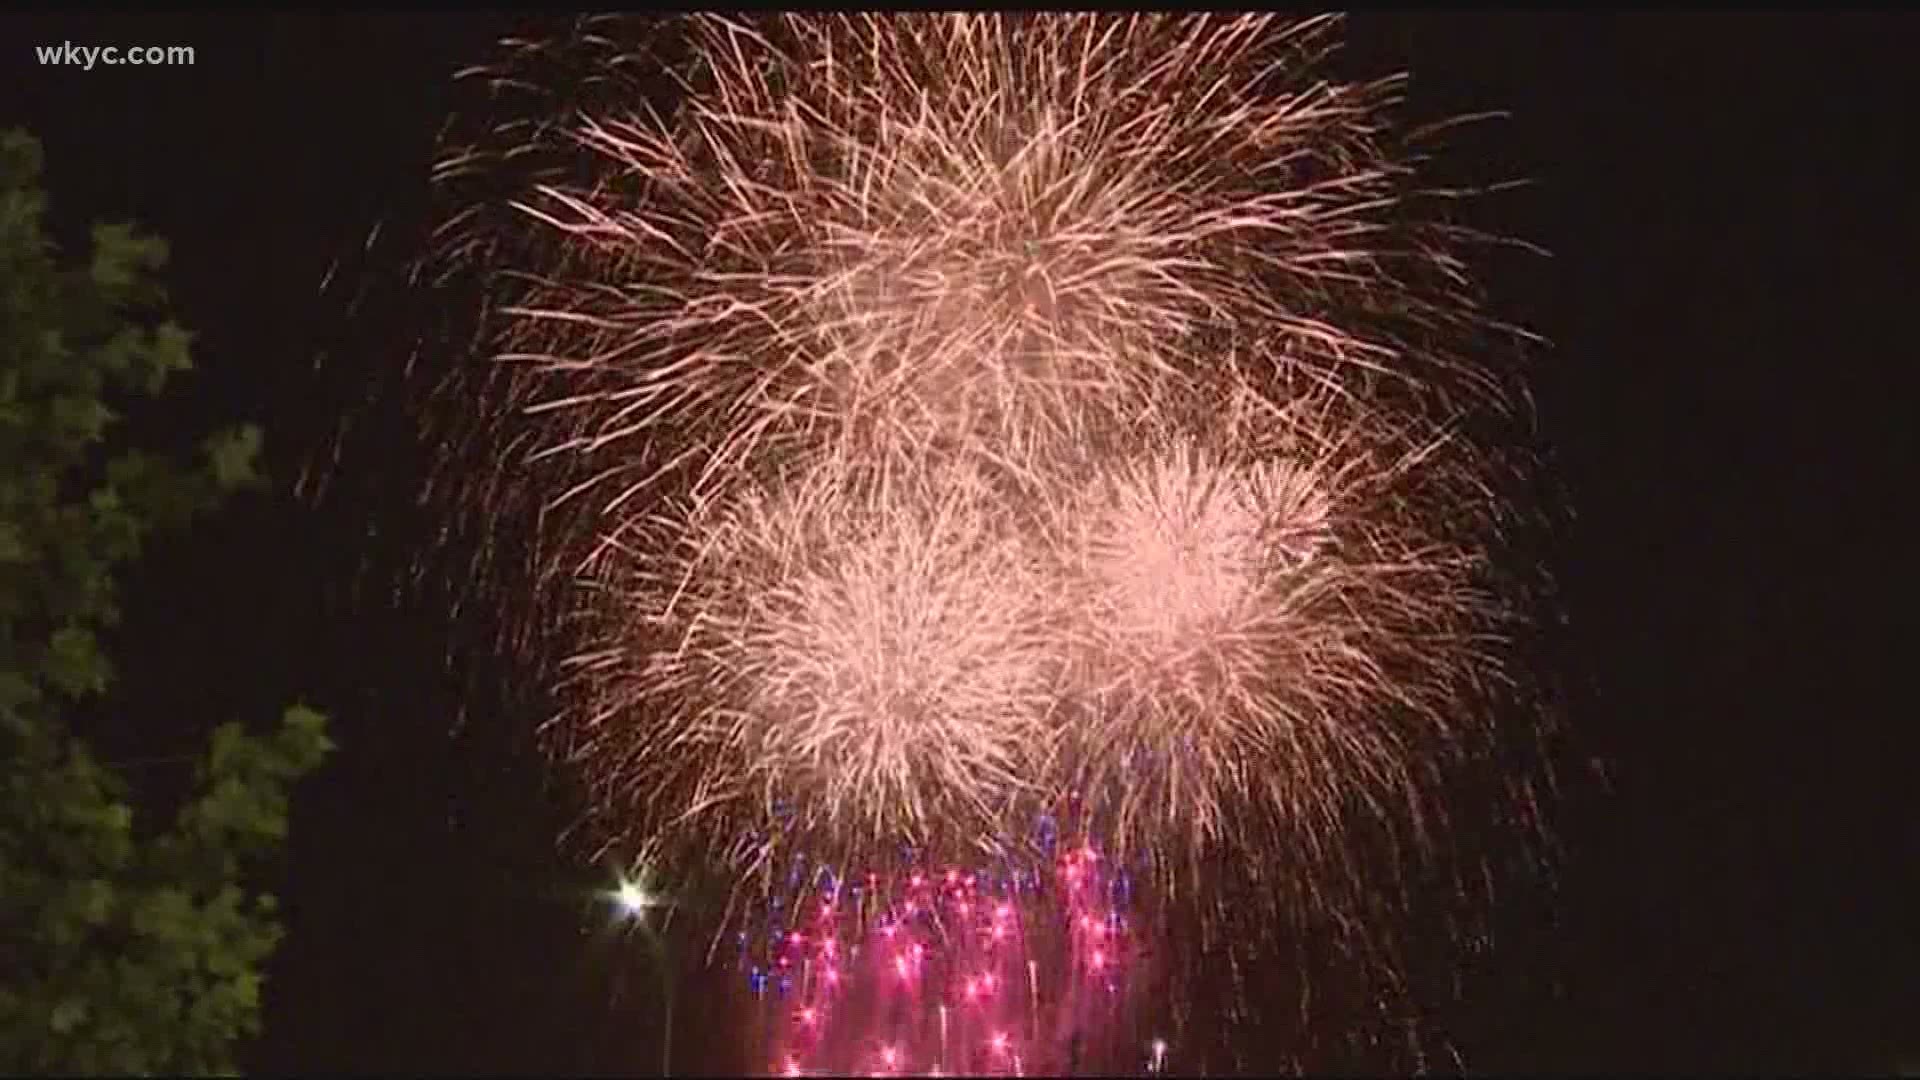 This weekend, people will celebrate Independence Day without COVID restrictions. Many festivities were canceled last year.